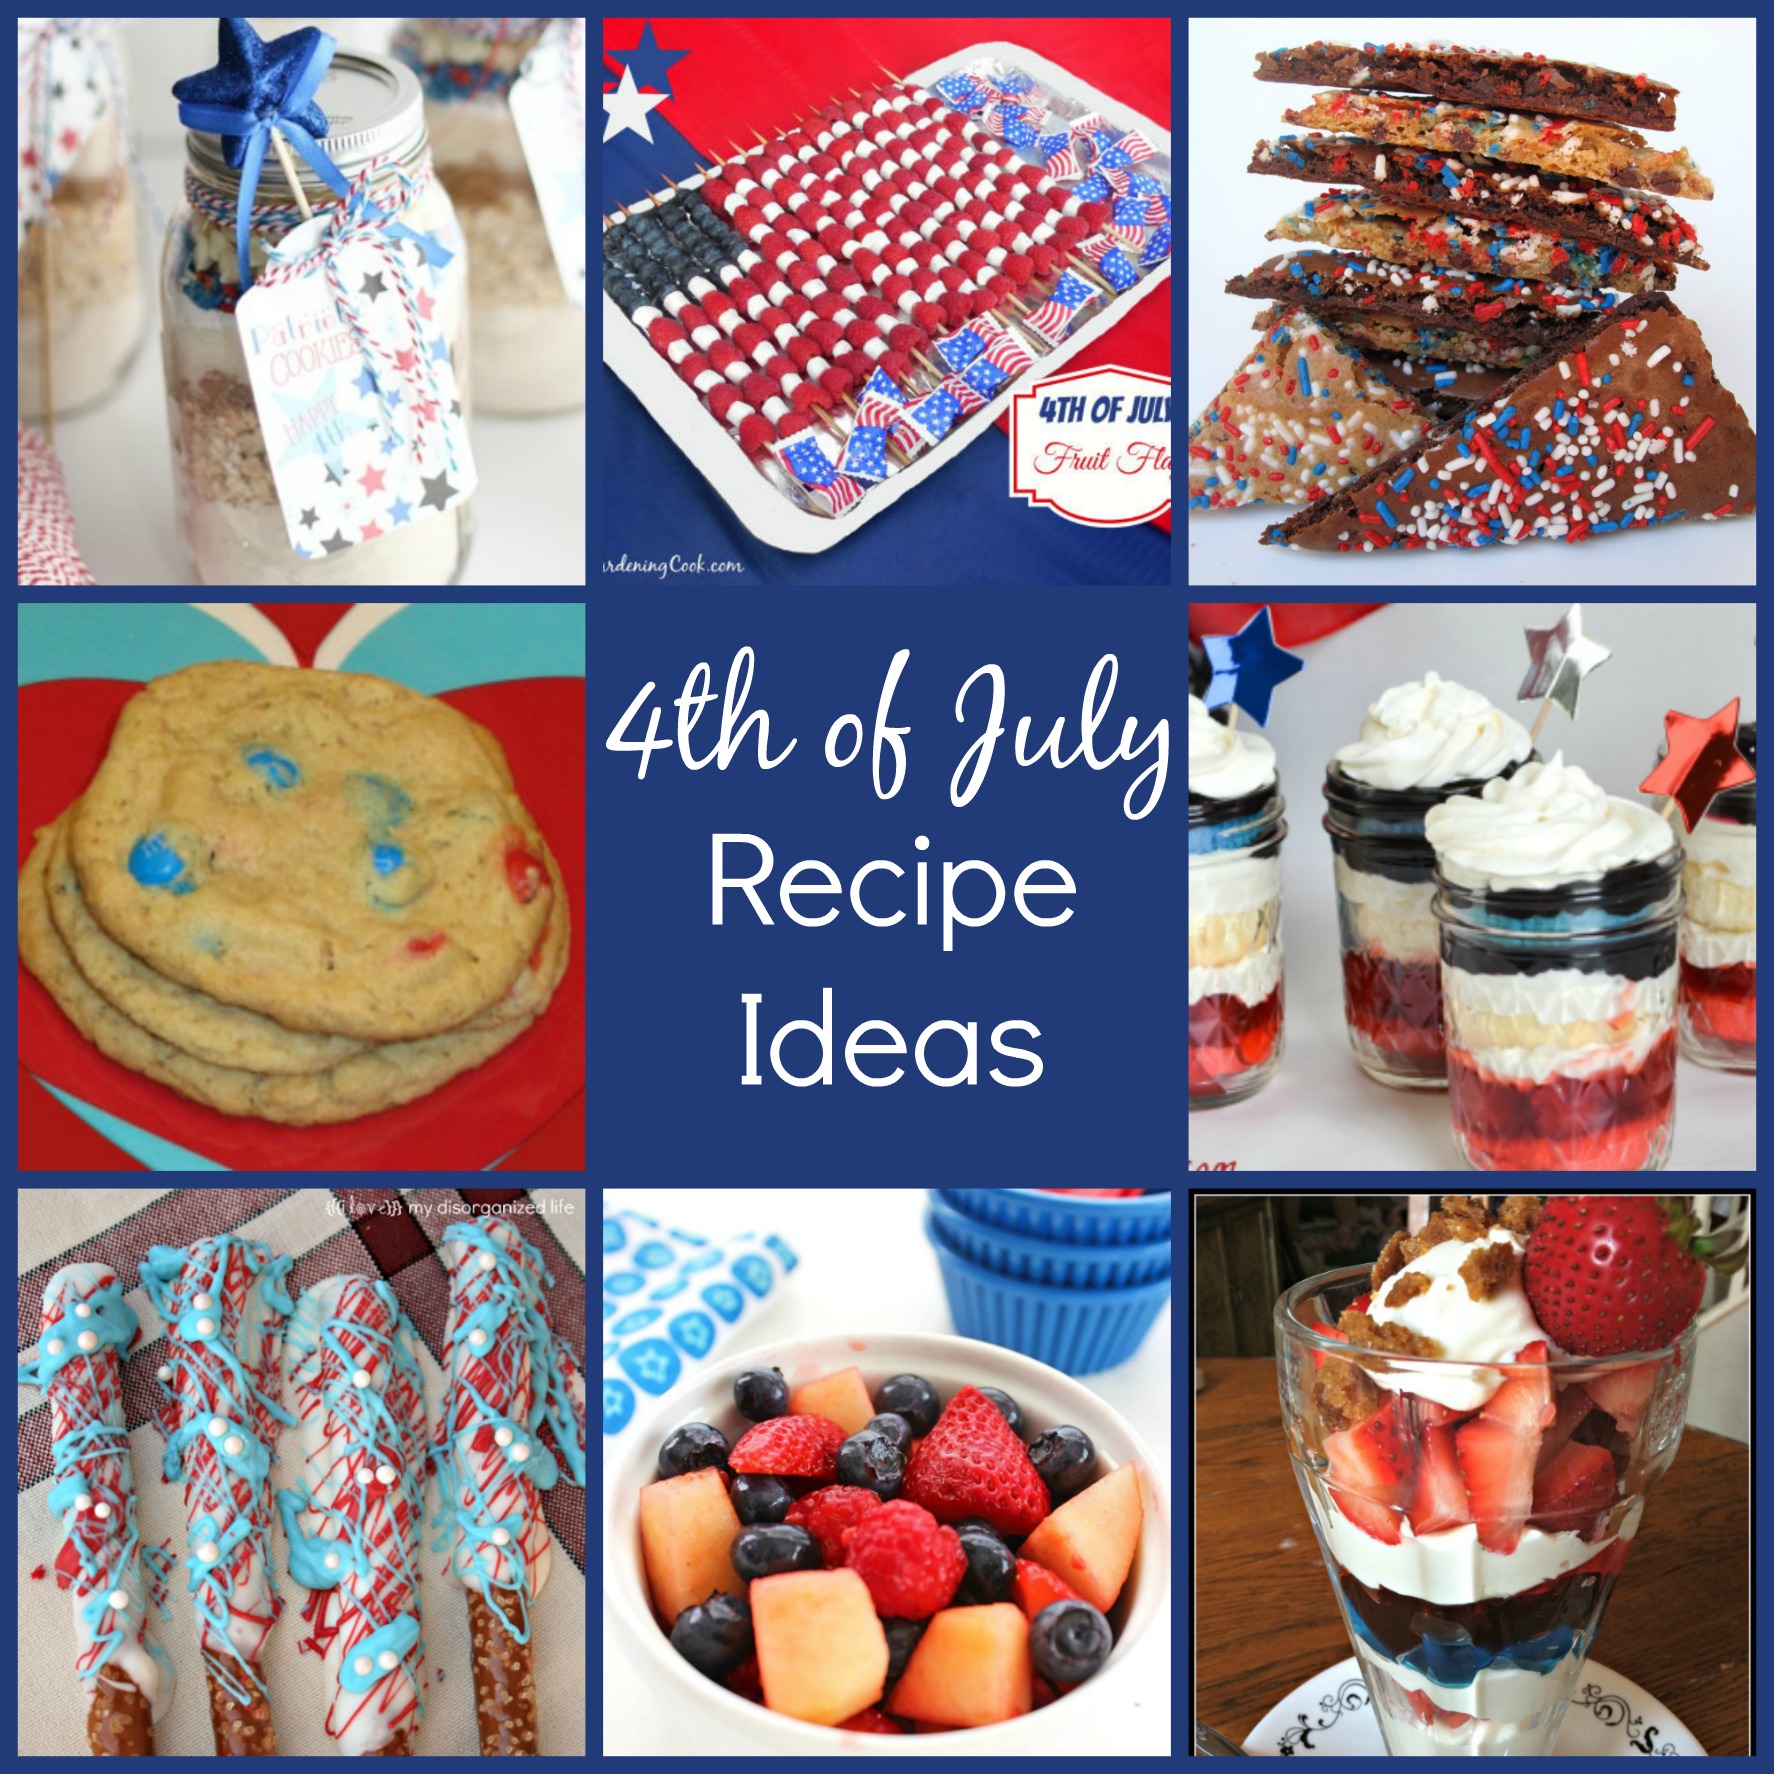 4th of July Recipe Ideas - Family Fun Journal